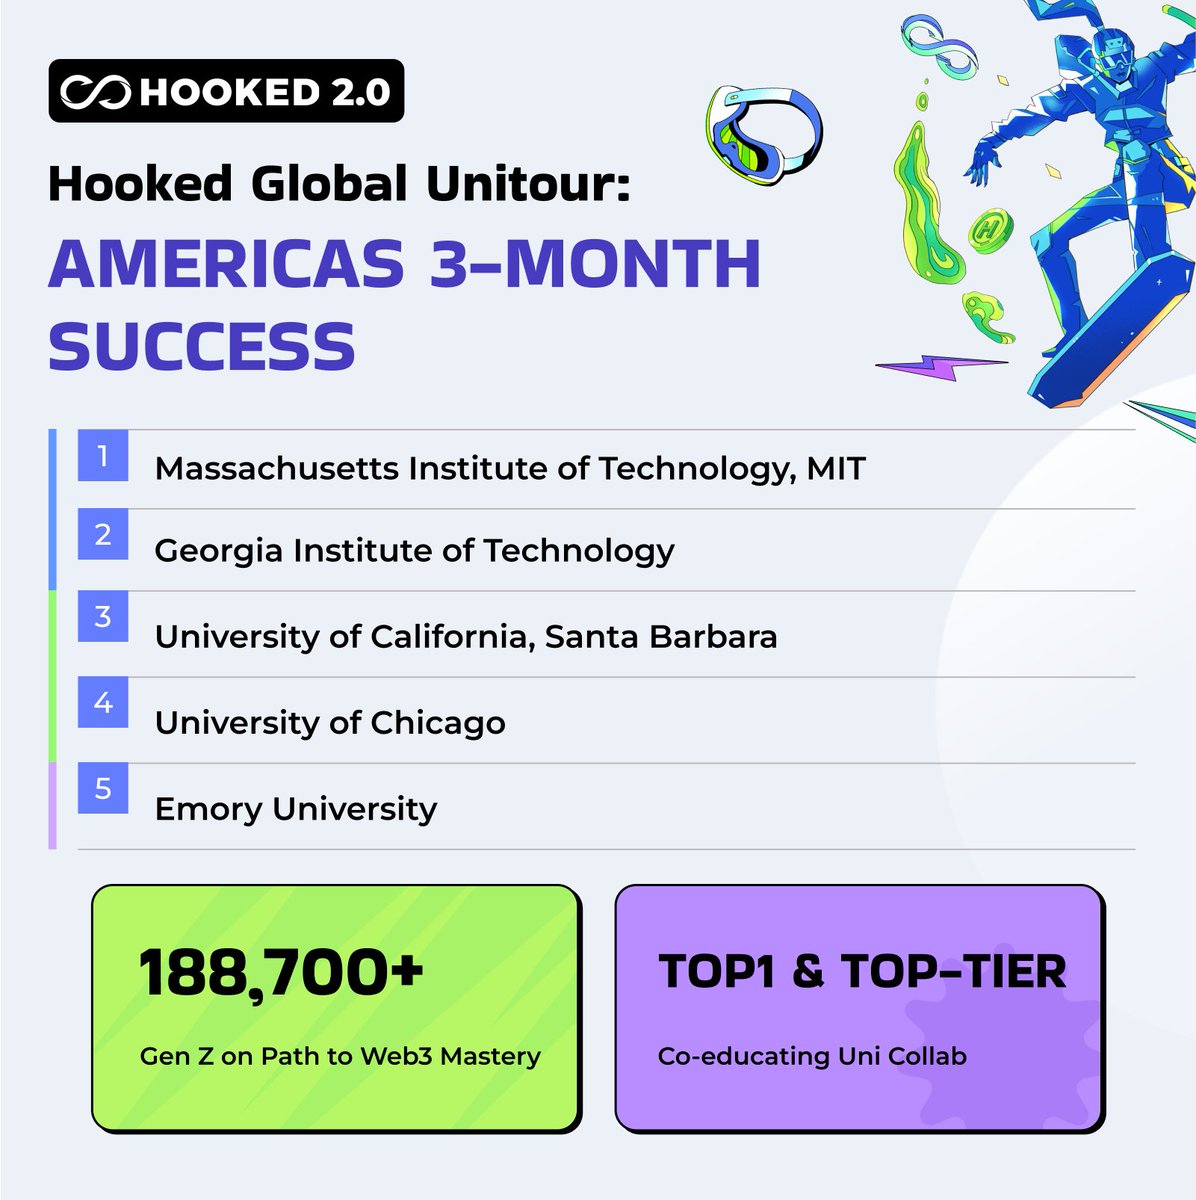 #NewEraofHOOKED #HookedUnitour 🌟 Marking 3 Months of Hooked 2.0 Unitour: Americas Edition 🌎 Embarking on an illuminating journey across the Americas, Hooked Unitour aims to cultivate perpetual growth through Web3 Mastery. 🏫Teaming up with 5+ leading universities & industry